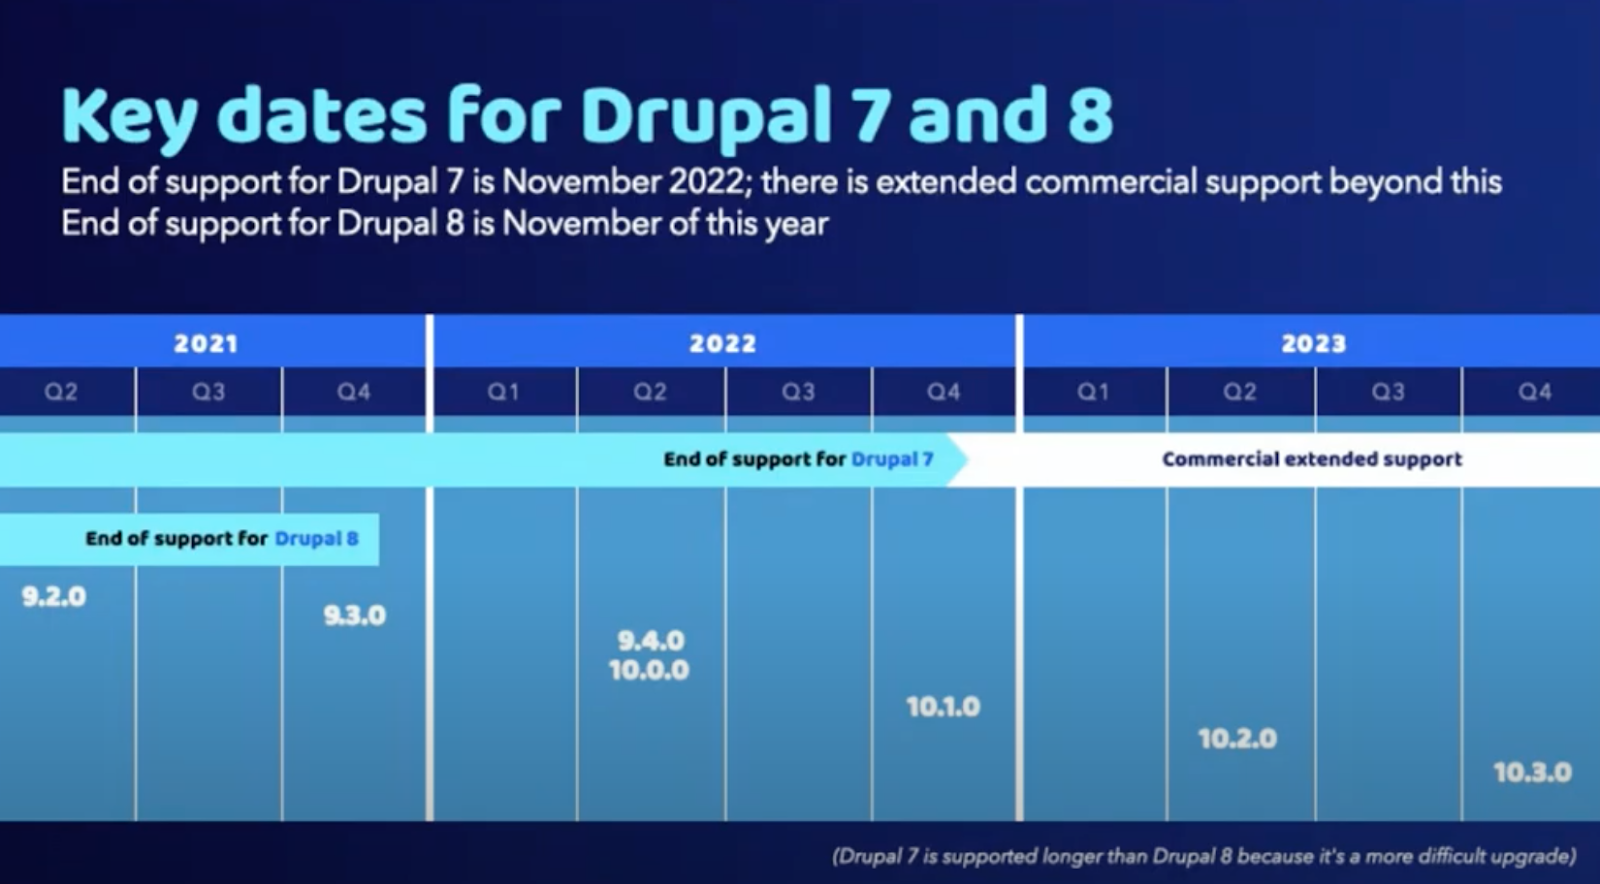 Key dates for Drupal 7 and 8 